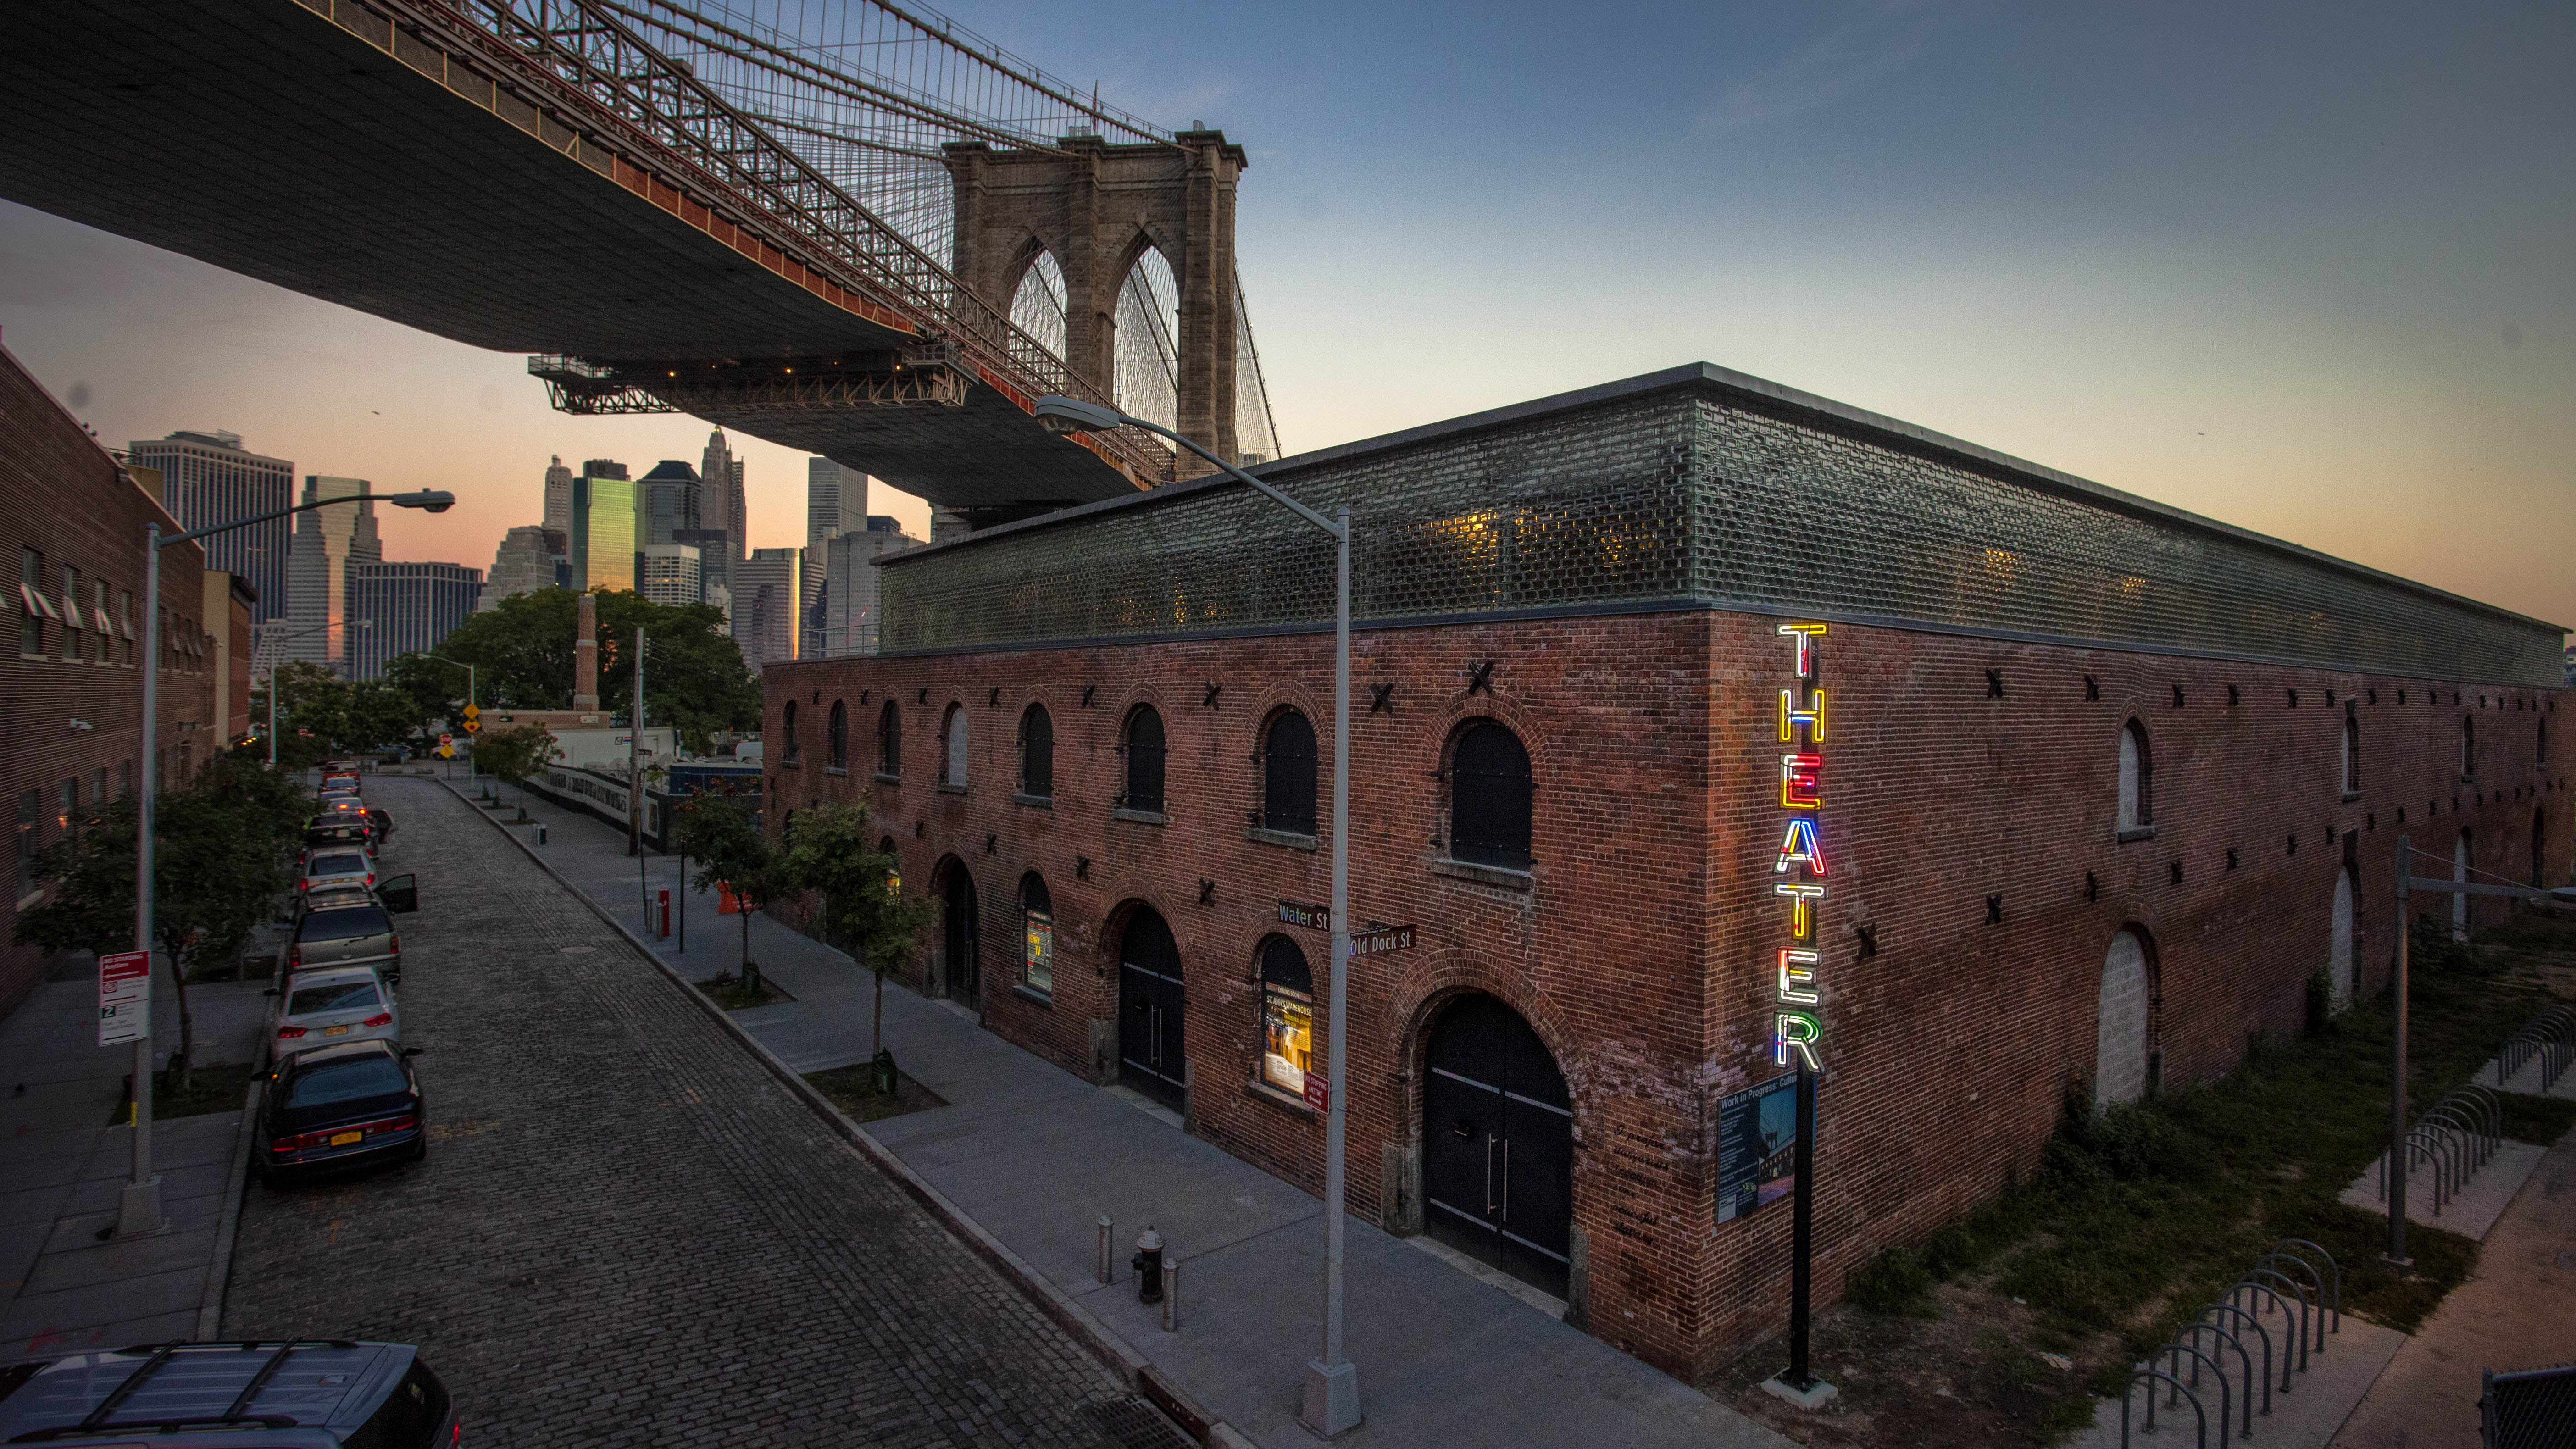 St Ann's Warehouse by Marvel Architects in Brooklyn, New York